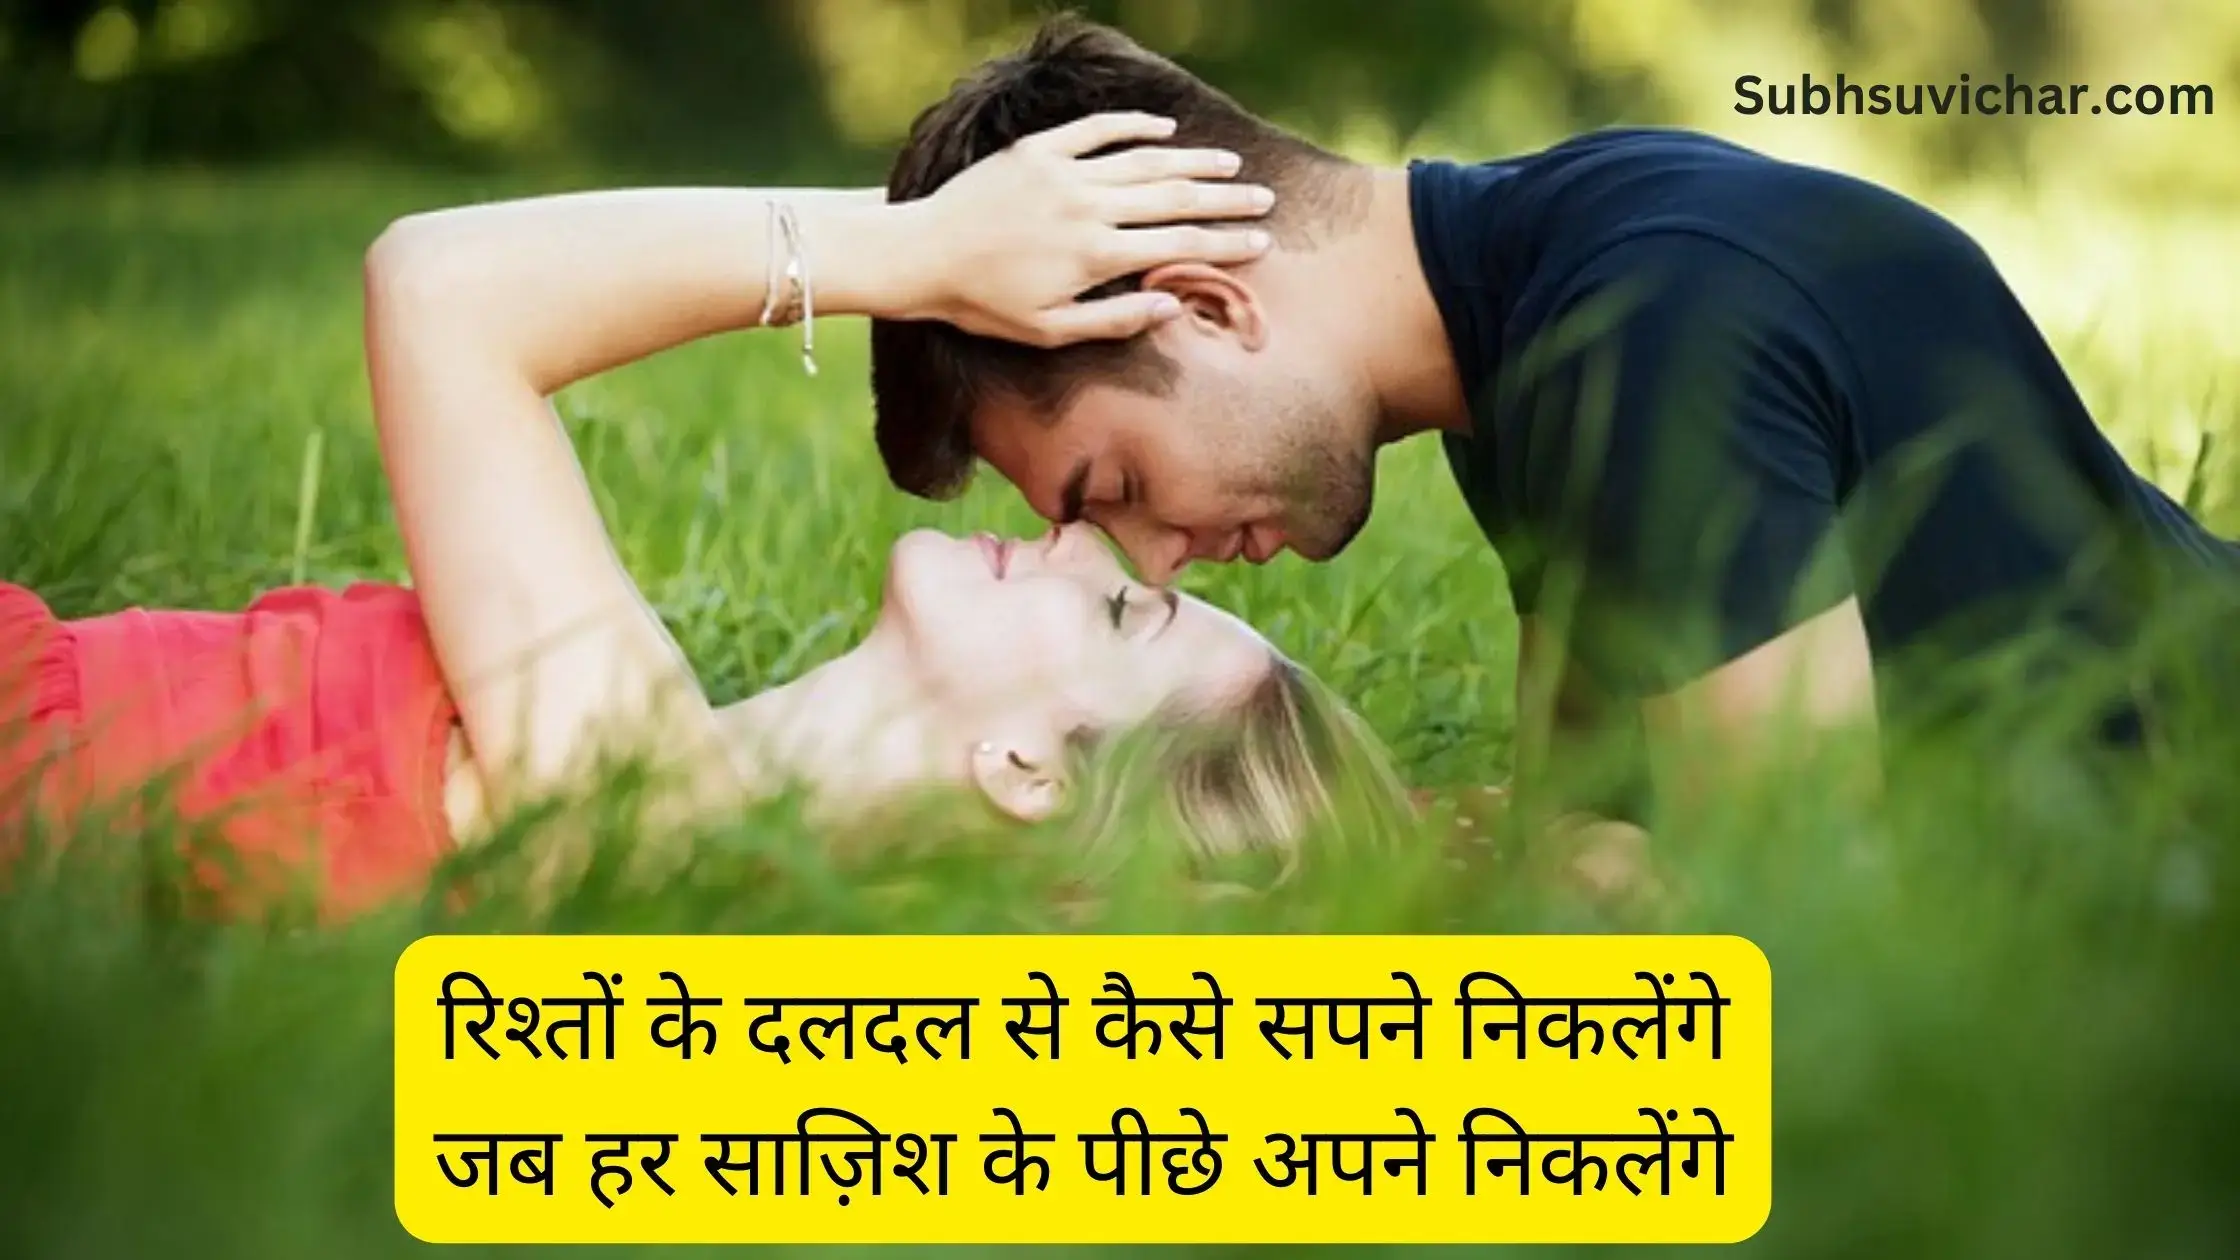 This post contains huge collection of breakup sad shayari in hindi font with high quality images for your whatsaap and facebook status.